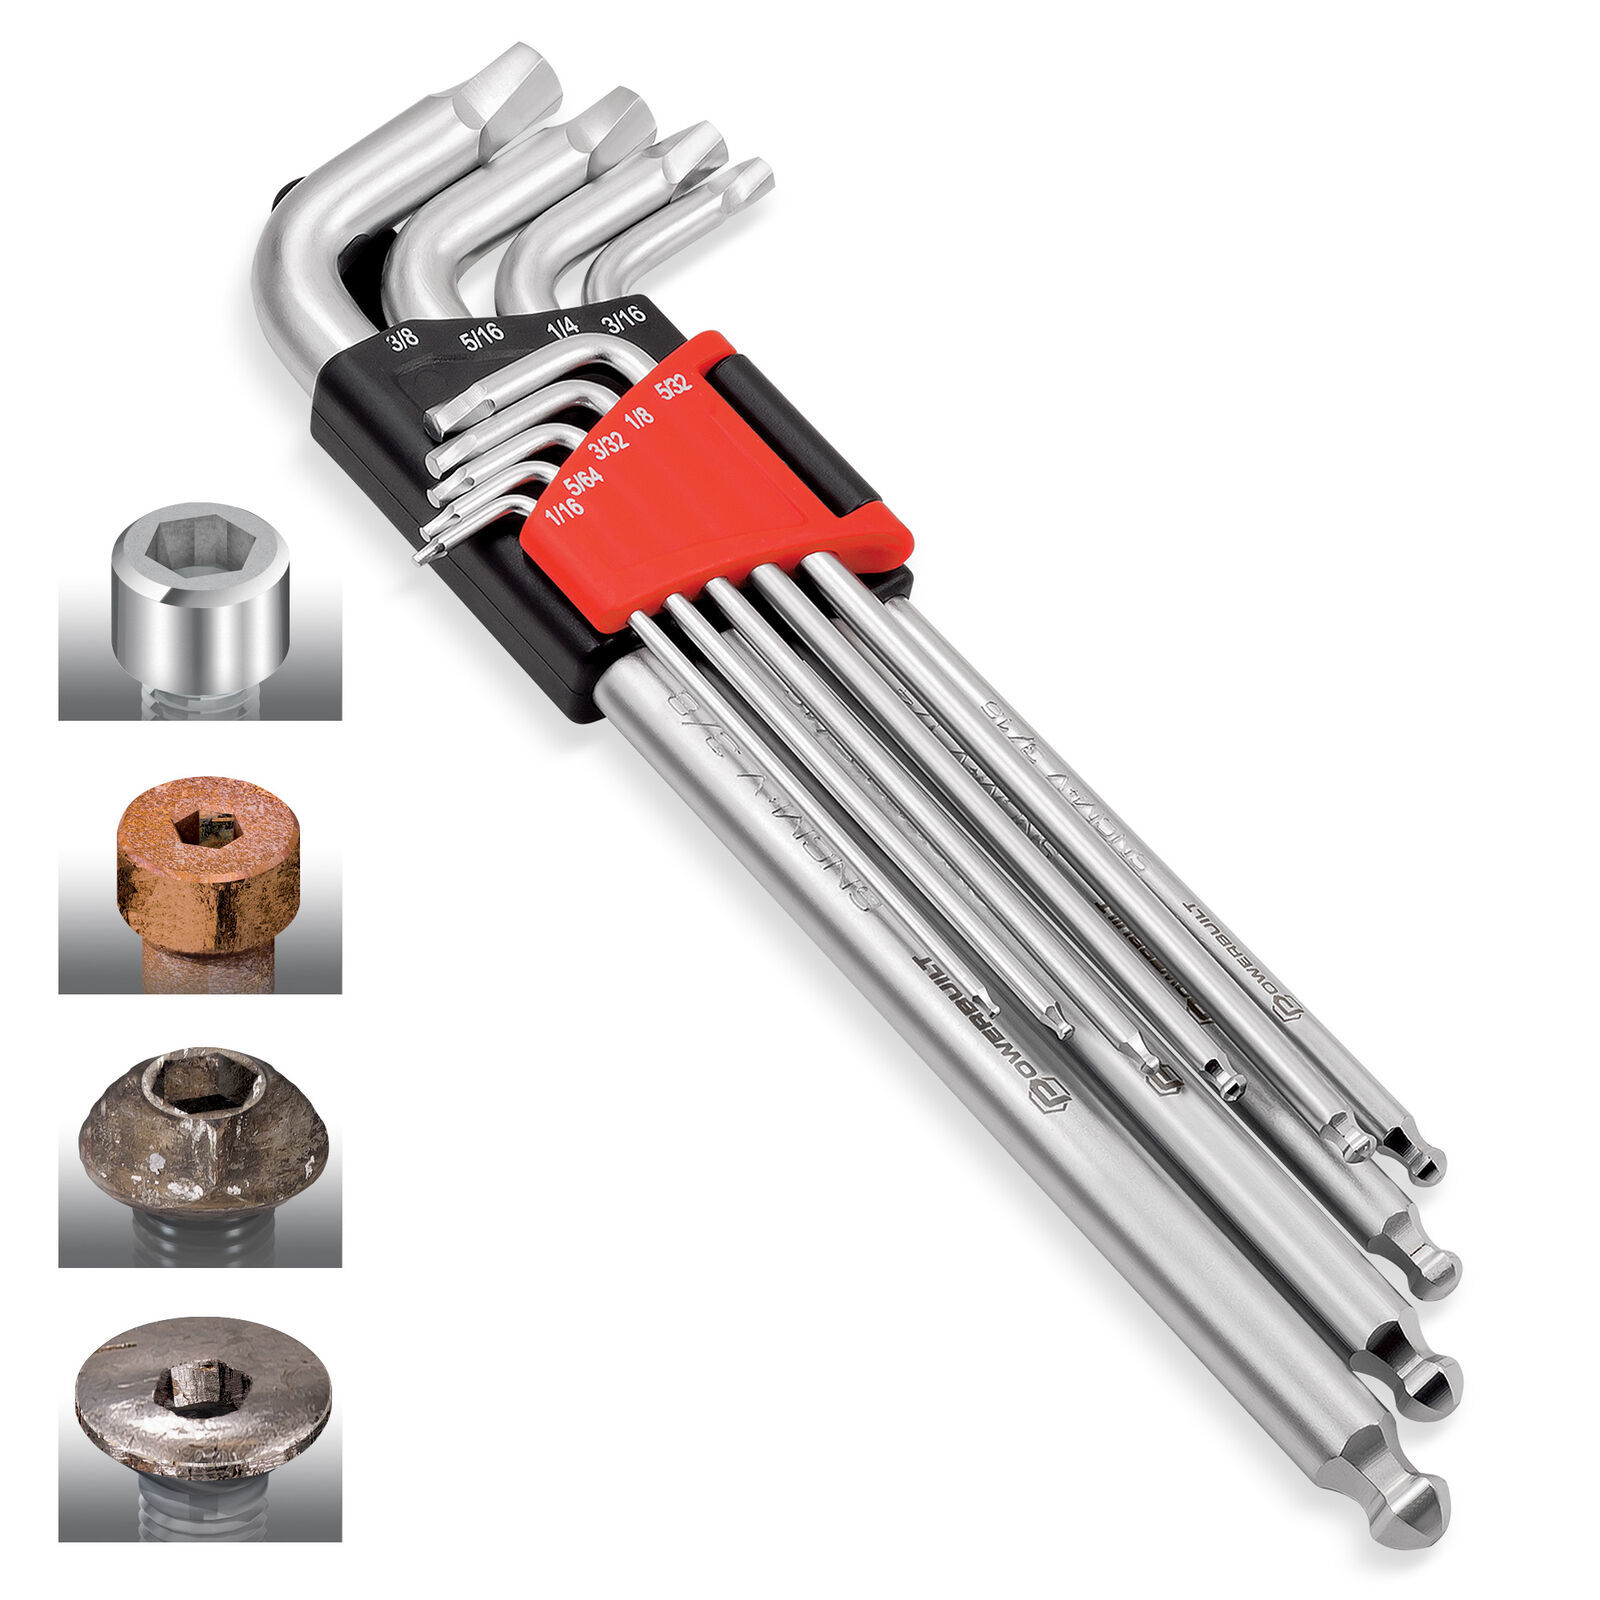 Powerbuilt 9 Piece Zeon SAE Hex Key Wrench Set for Damaged Fasteners - 240096 - $64.99